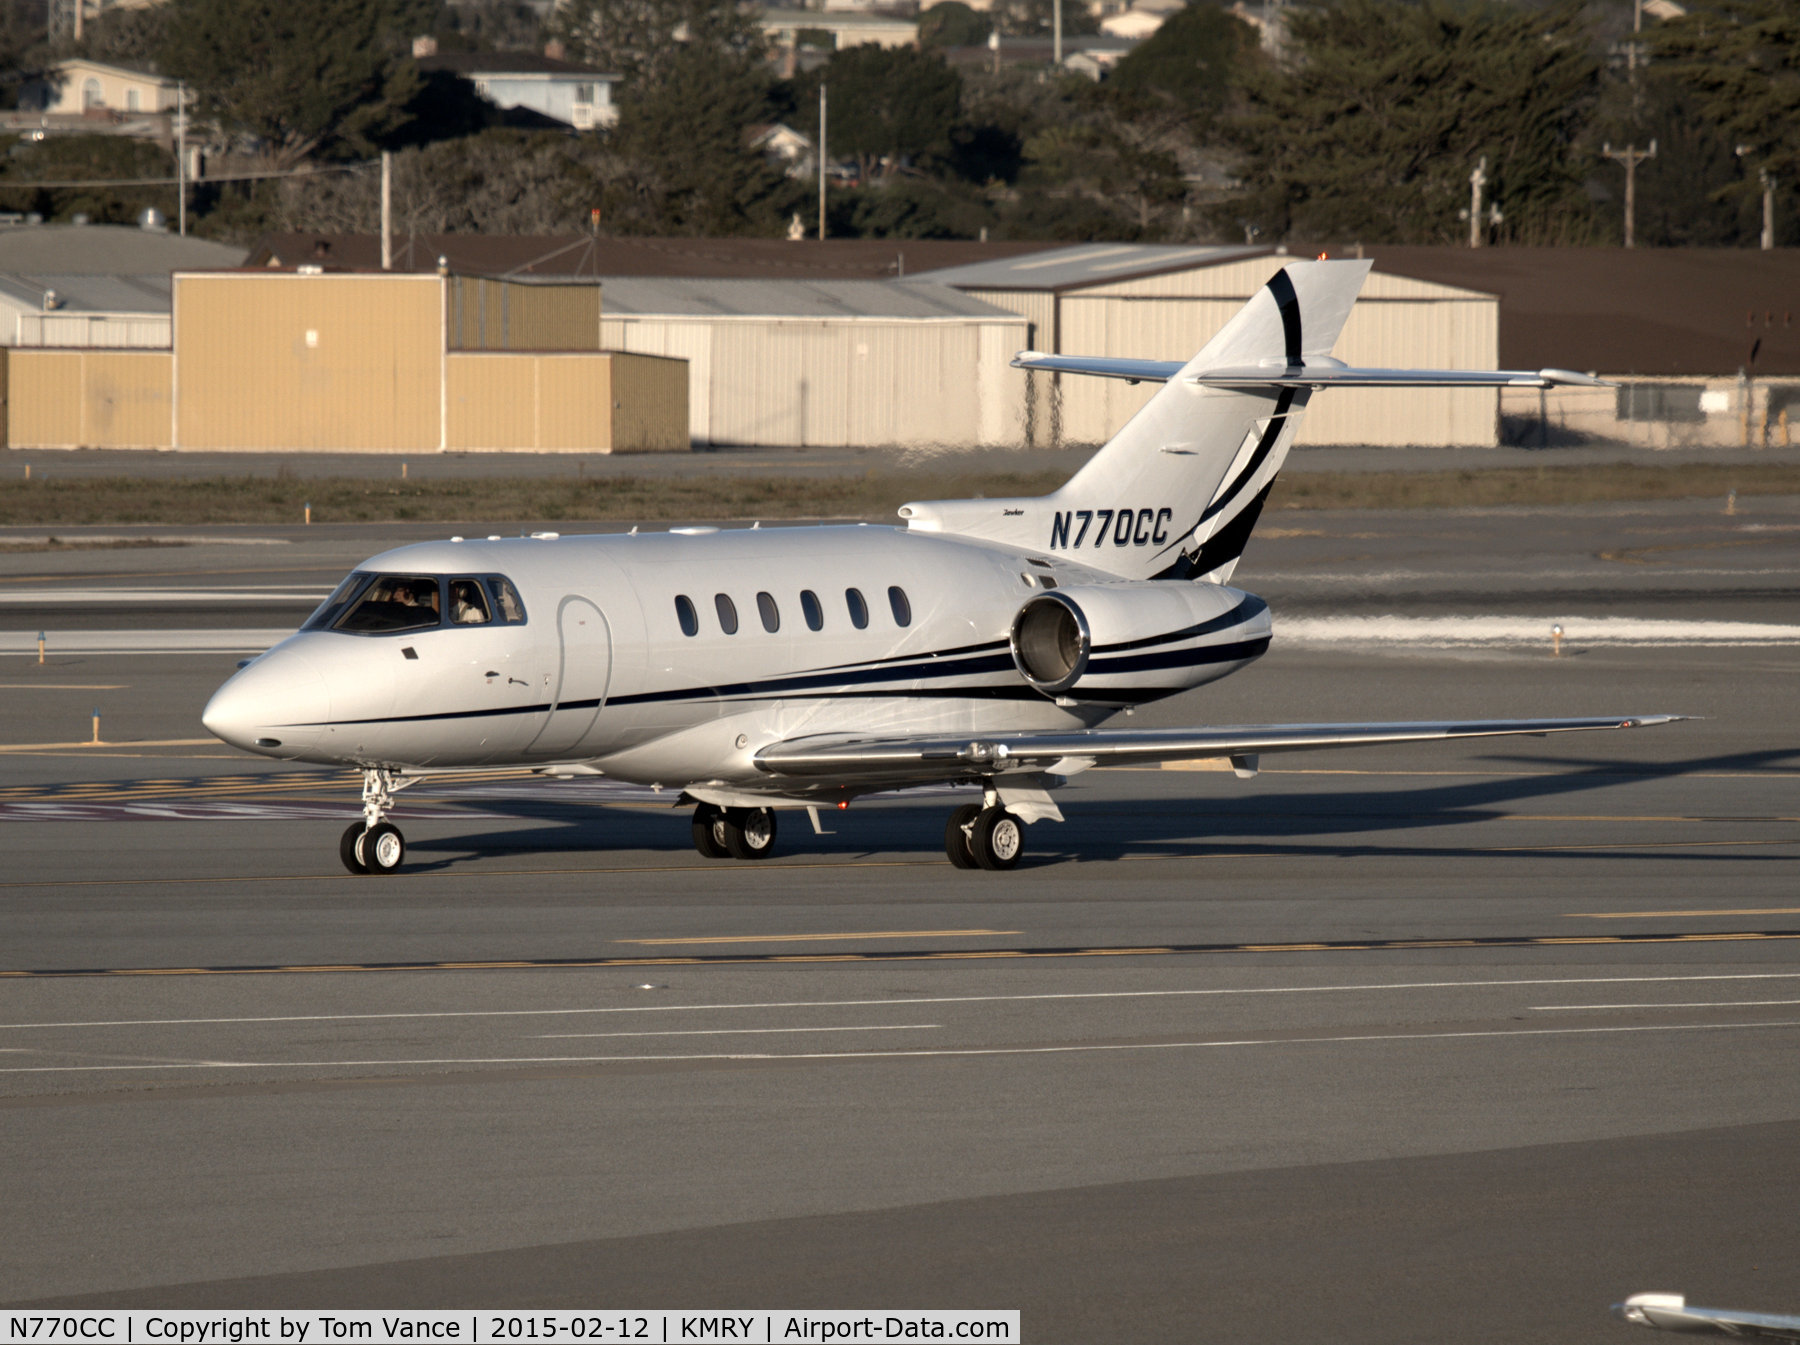 N770CC, 2002 Raytheon Hawker 800XP C/N 258587, KMRY - N770CC arriving at Monterey during AT&T Pro Am Golf Weekend 2015.